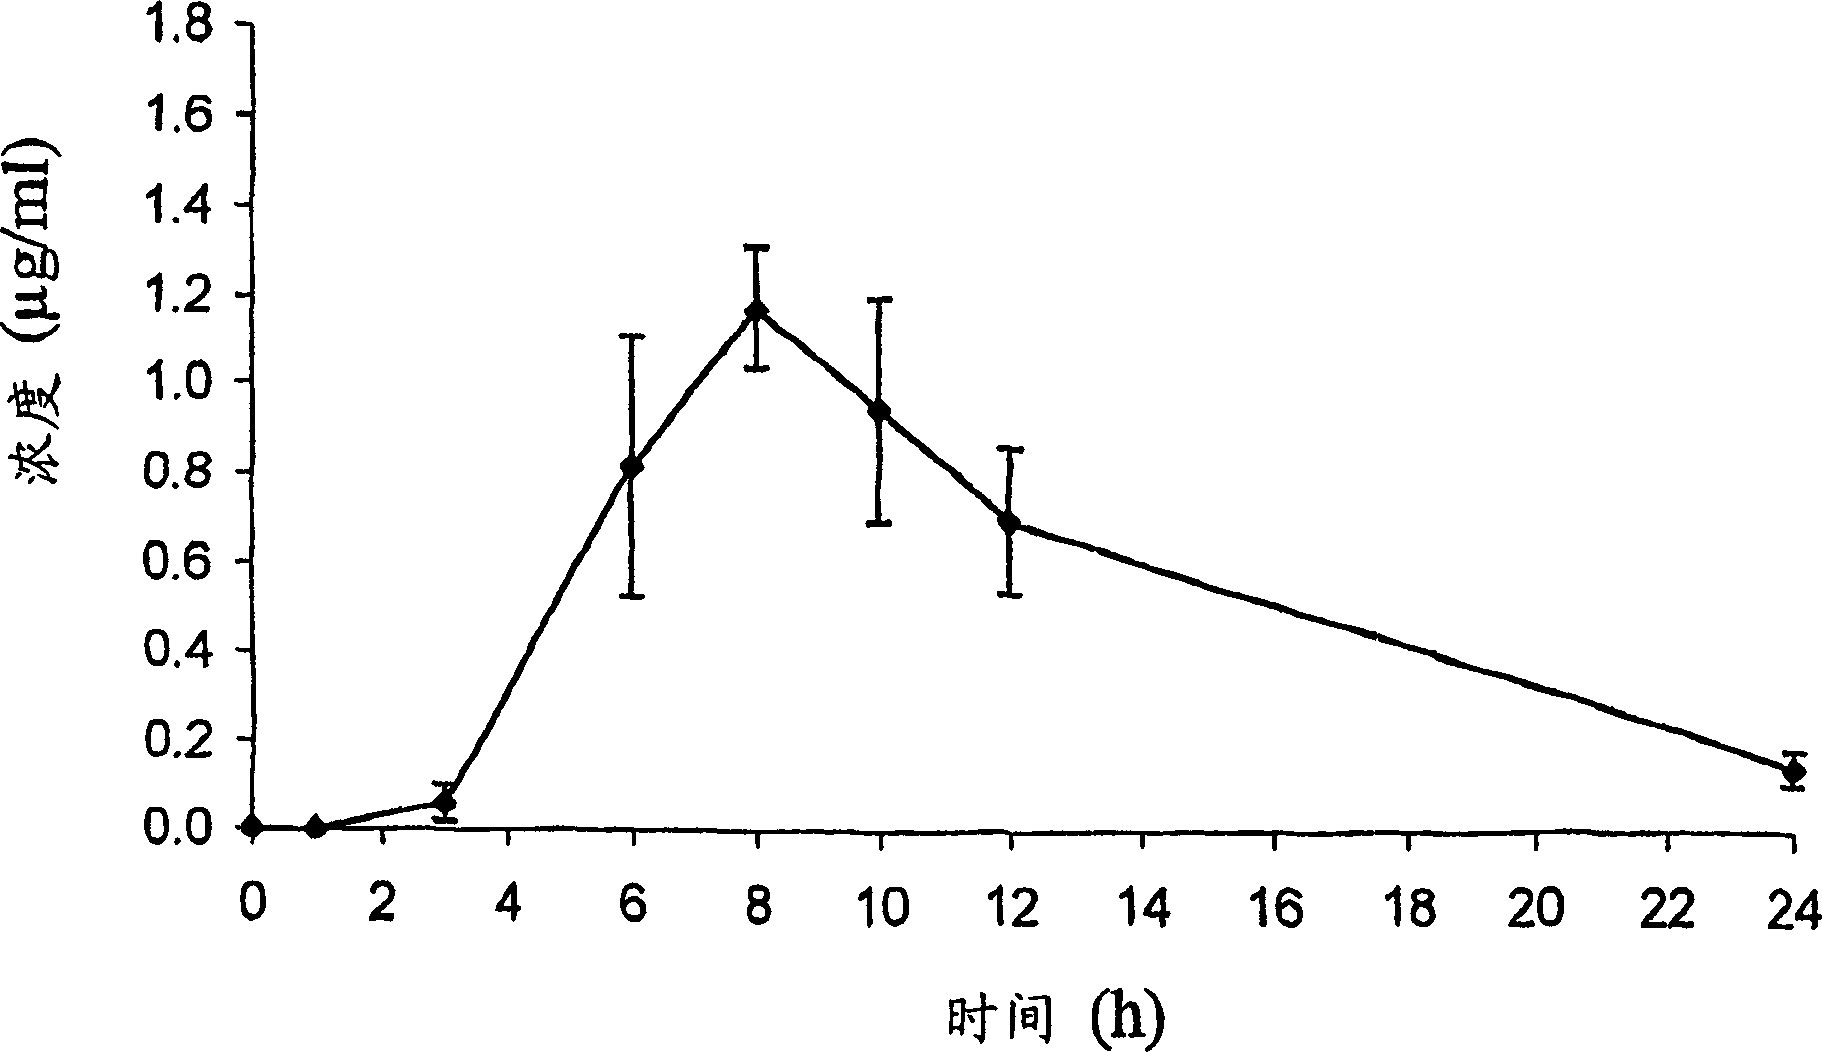 Phospholipid derivatives of valproic acid and mixtures thereof